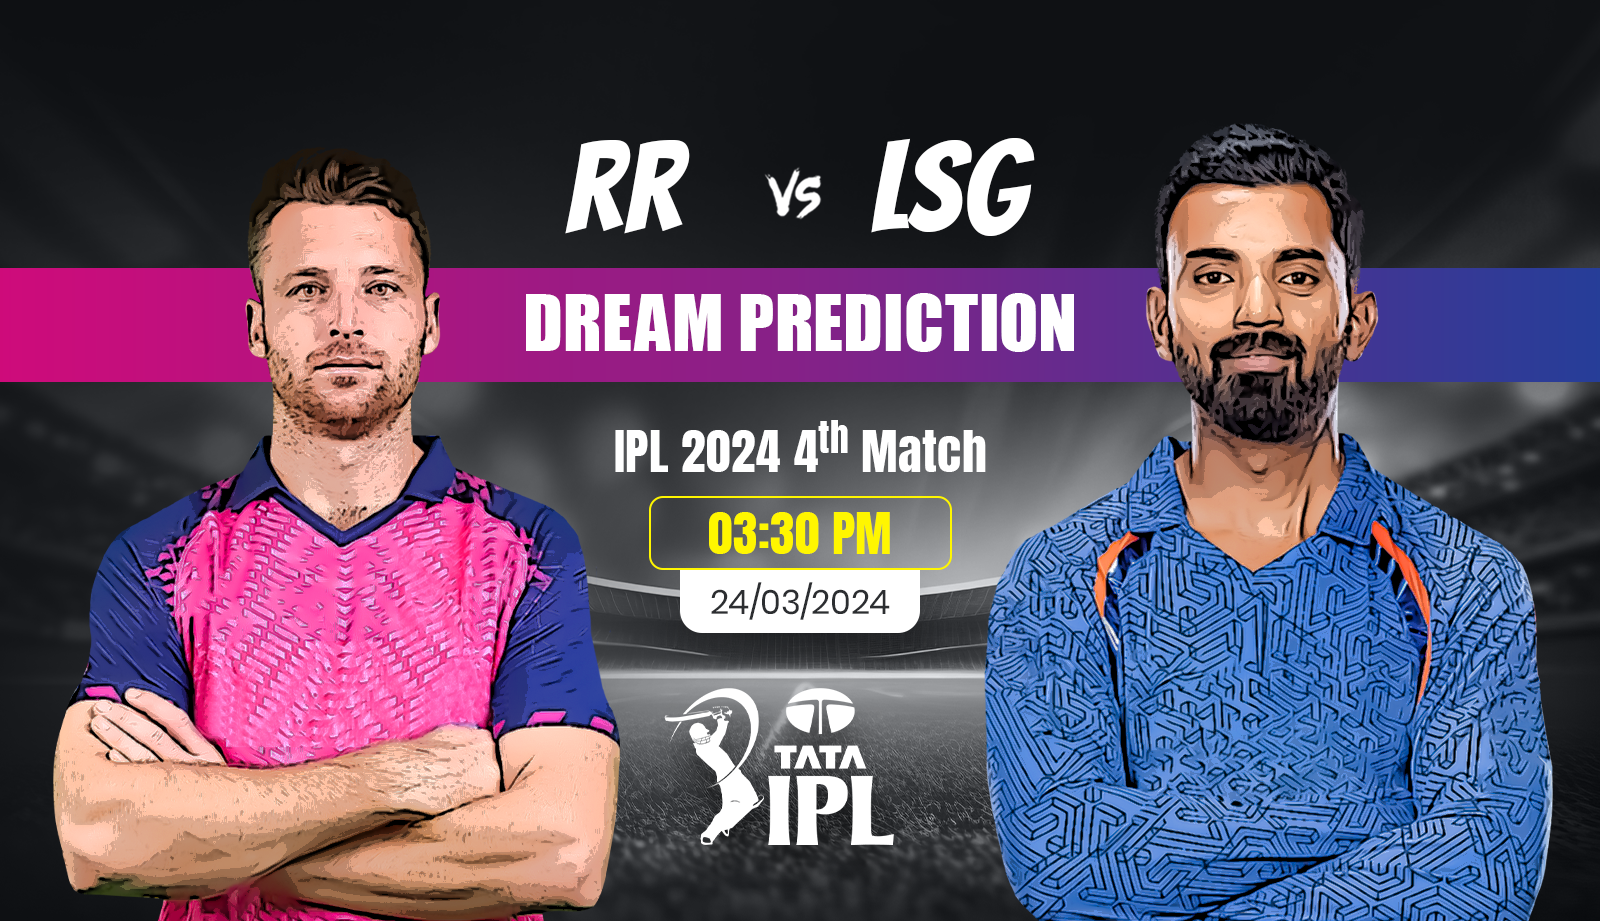 IPL-2024-RR-vs-LSG-Match-Prediction-and-Fantasy-tips-Playing-11s-Pitch-Report-Weather-Injury-Update-and-Head-to-Head-Record.jpg